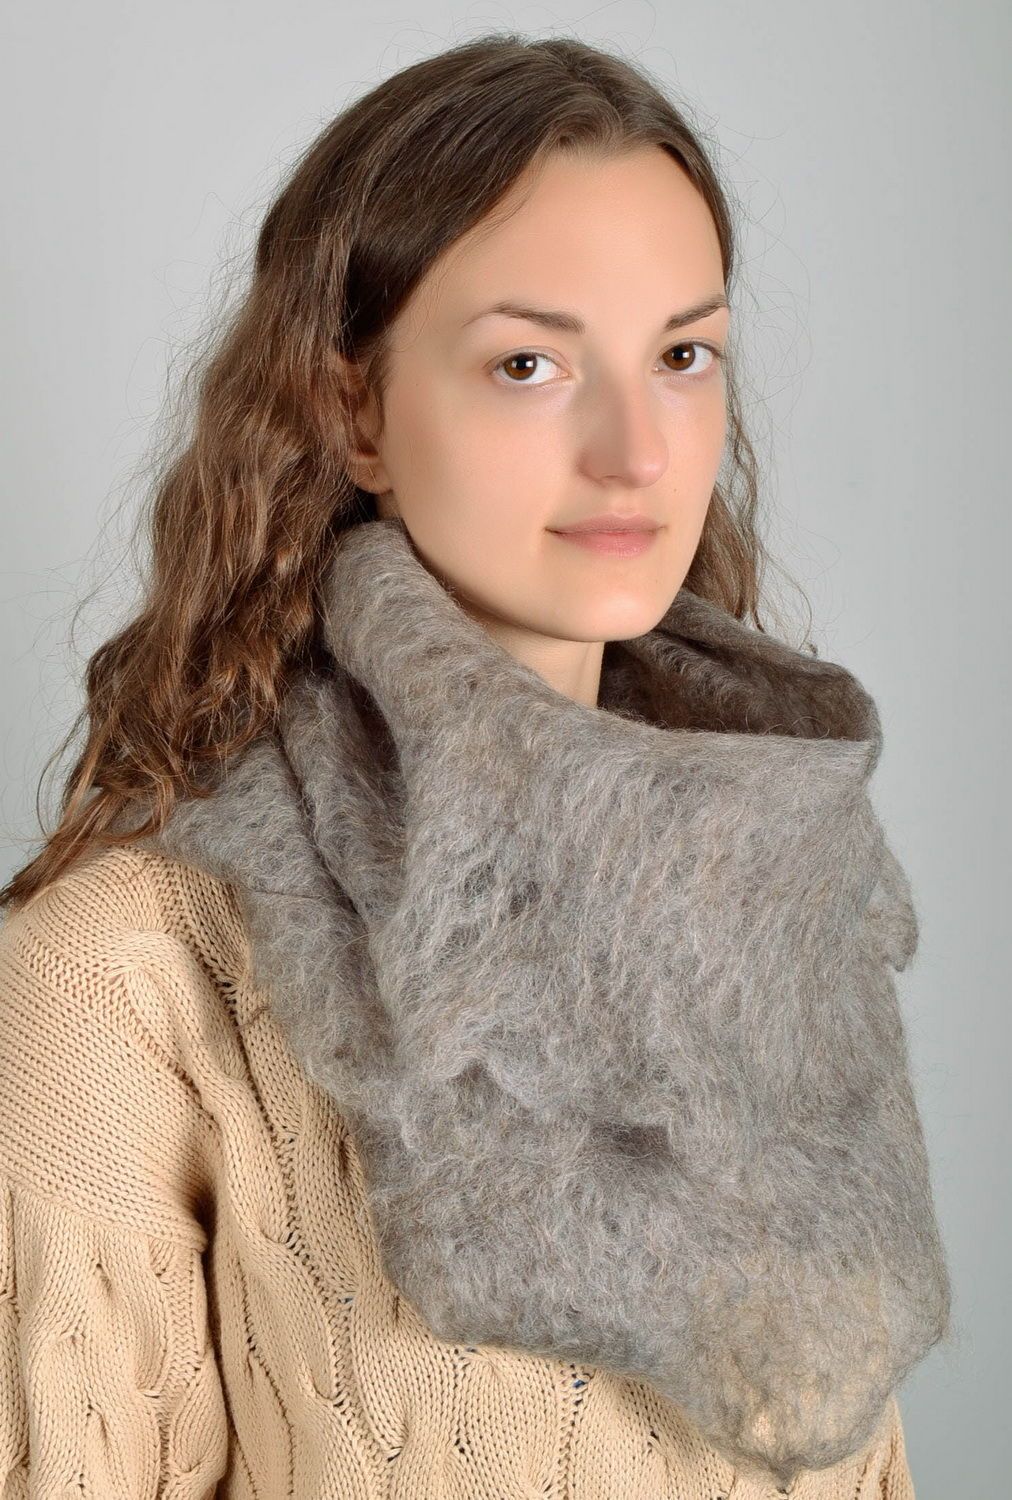 BUY Scarf made from wool in wet felting technique 1595651878 - HANDMADE ...